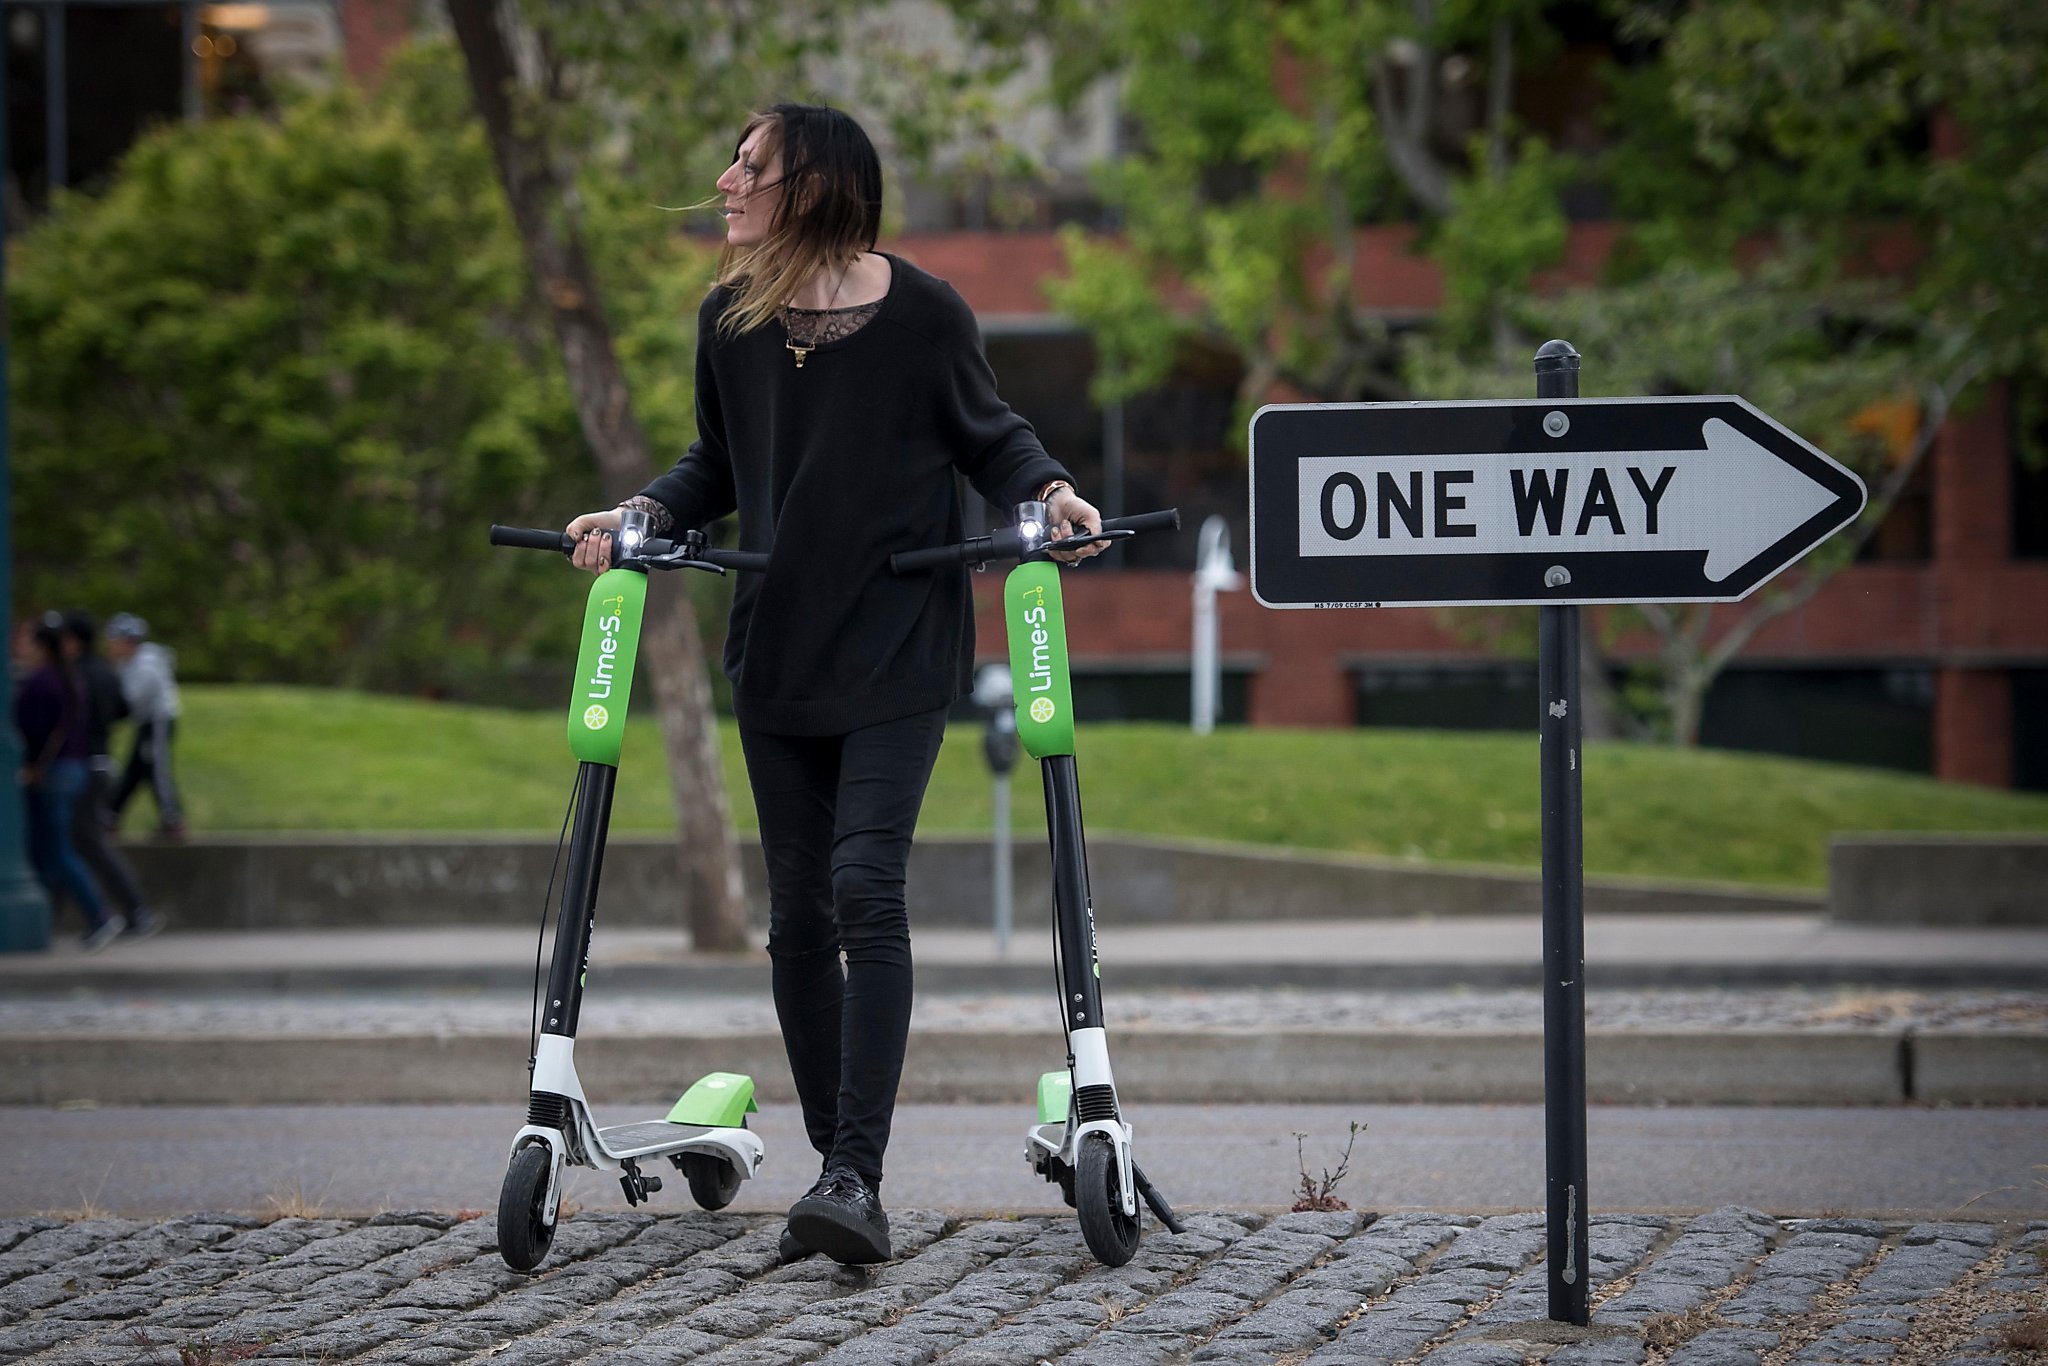 Scooter swear they're riding over users' privacy